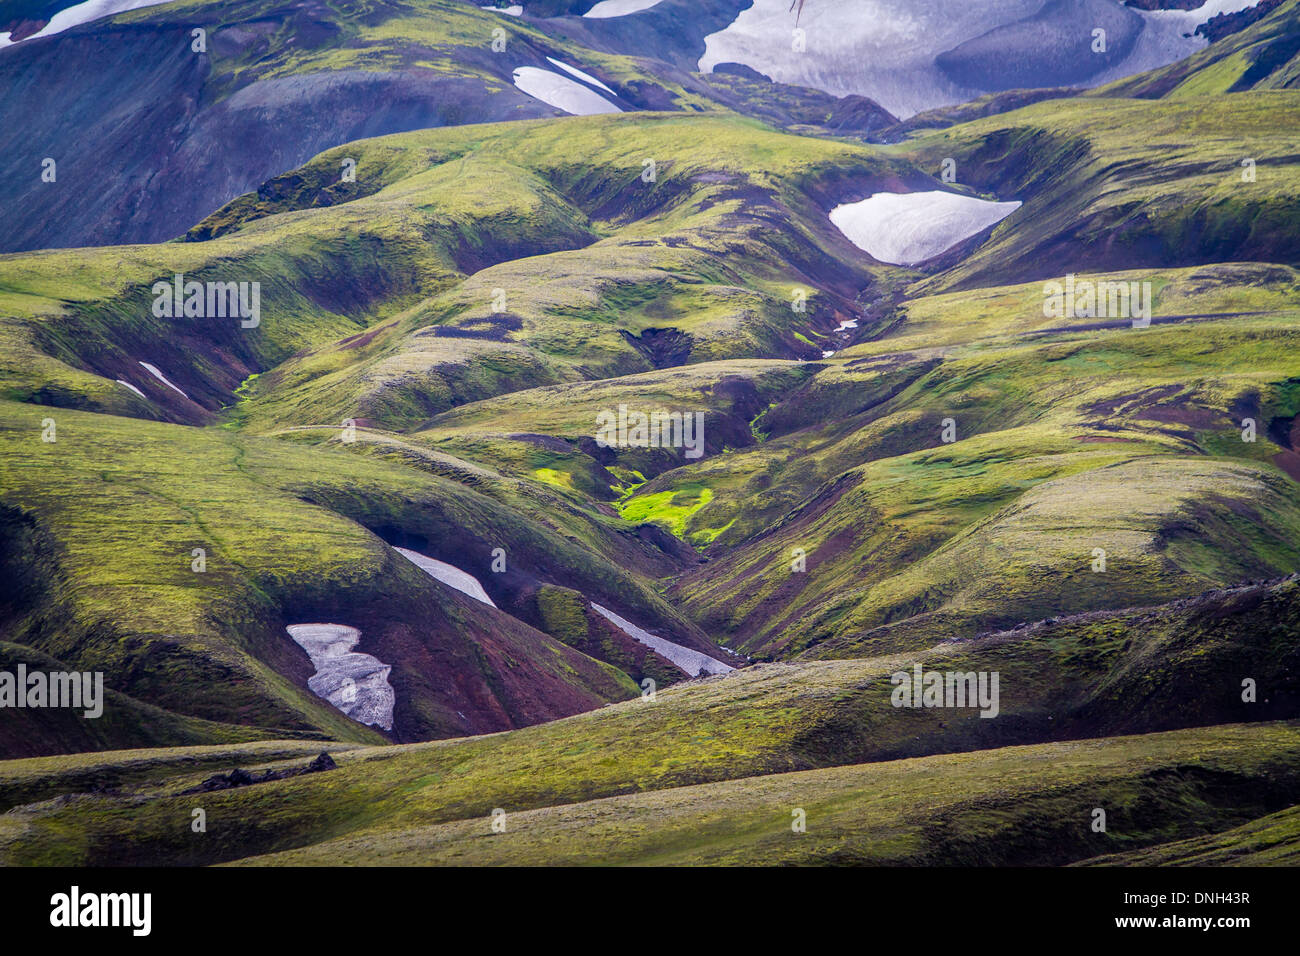 ETERNAL SNOWS IN LANDMANNALAUGAR, VOLCANIC AND GEOTHERMAL ZONE OF WHICH THE NAME LITERALLY MEANS 'HOT BATHS OF THE PEOPLE OF THE LAND', REGION OF THE HIGH PLATEAUS, SOUTHERN ICELAND, EUROPE Stock Photo